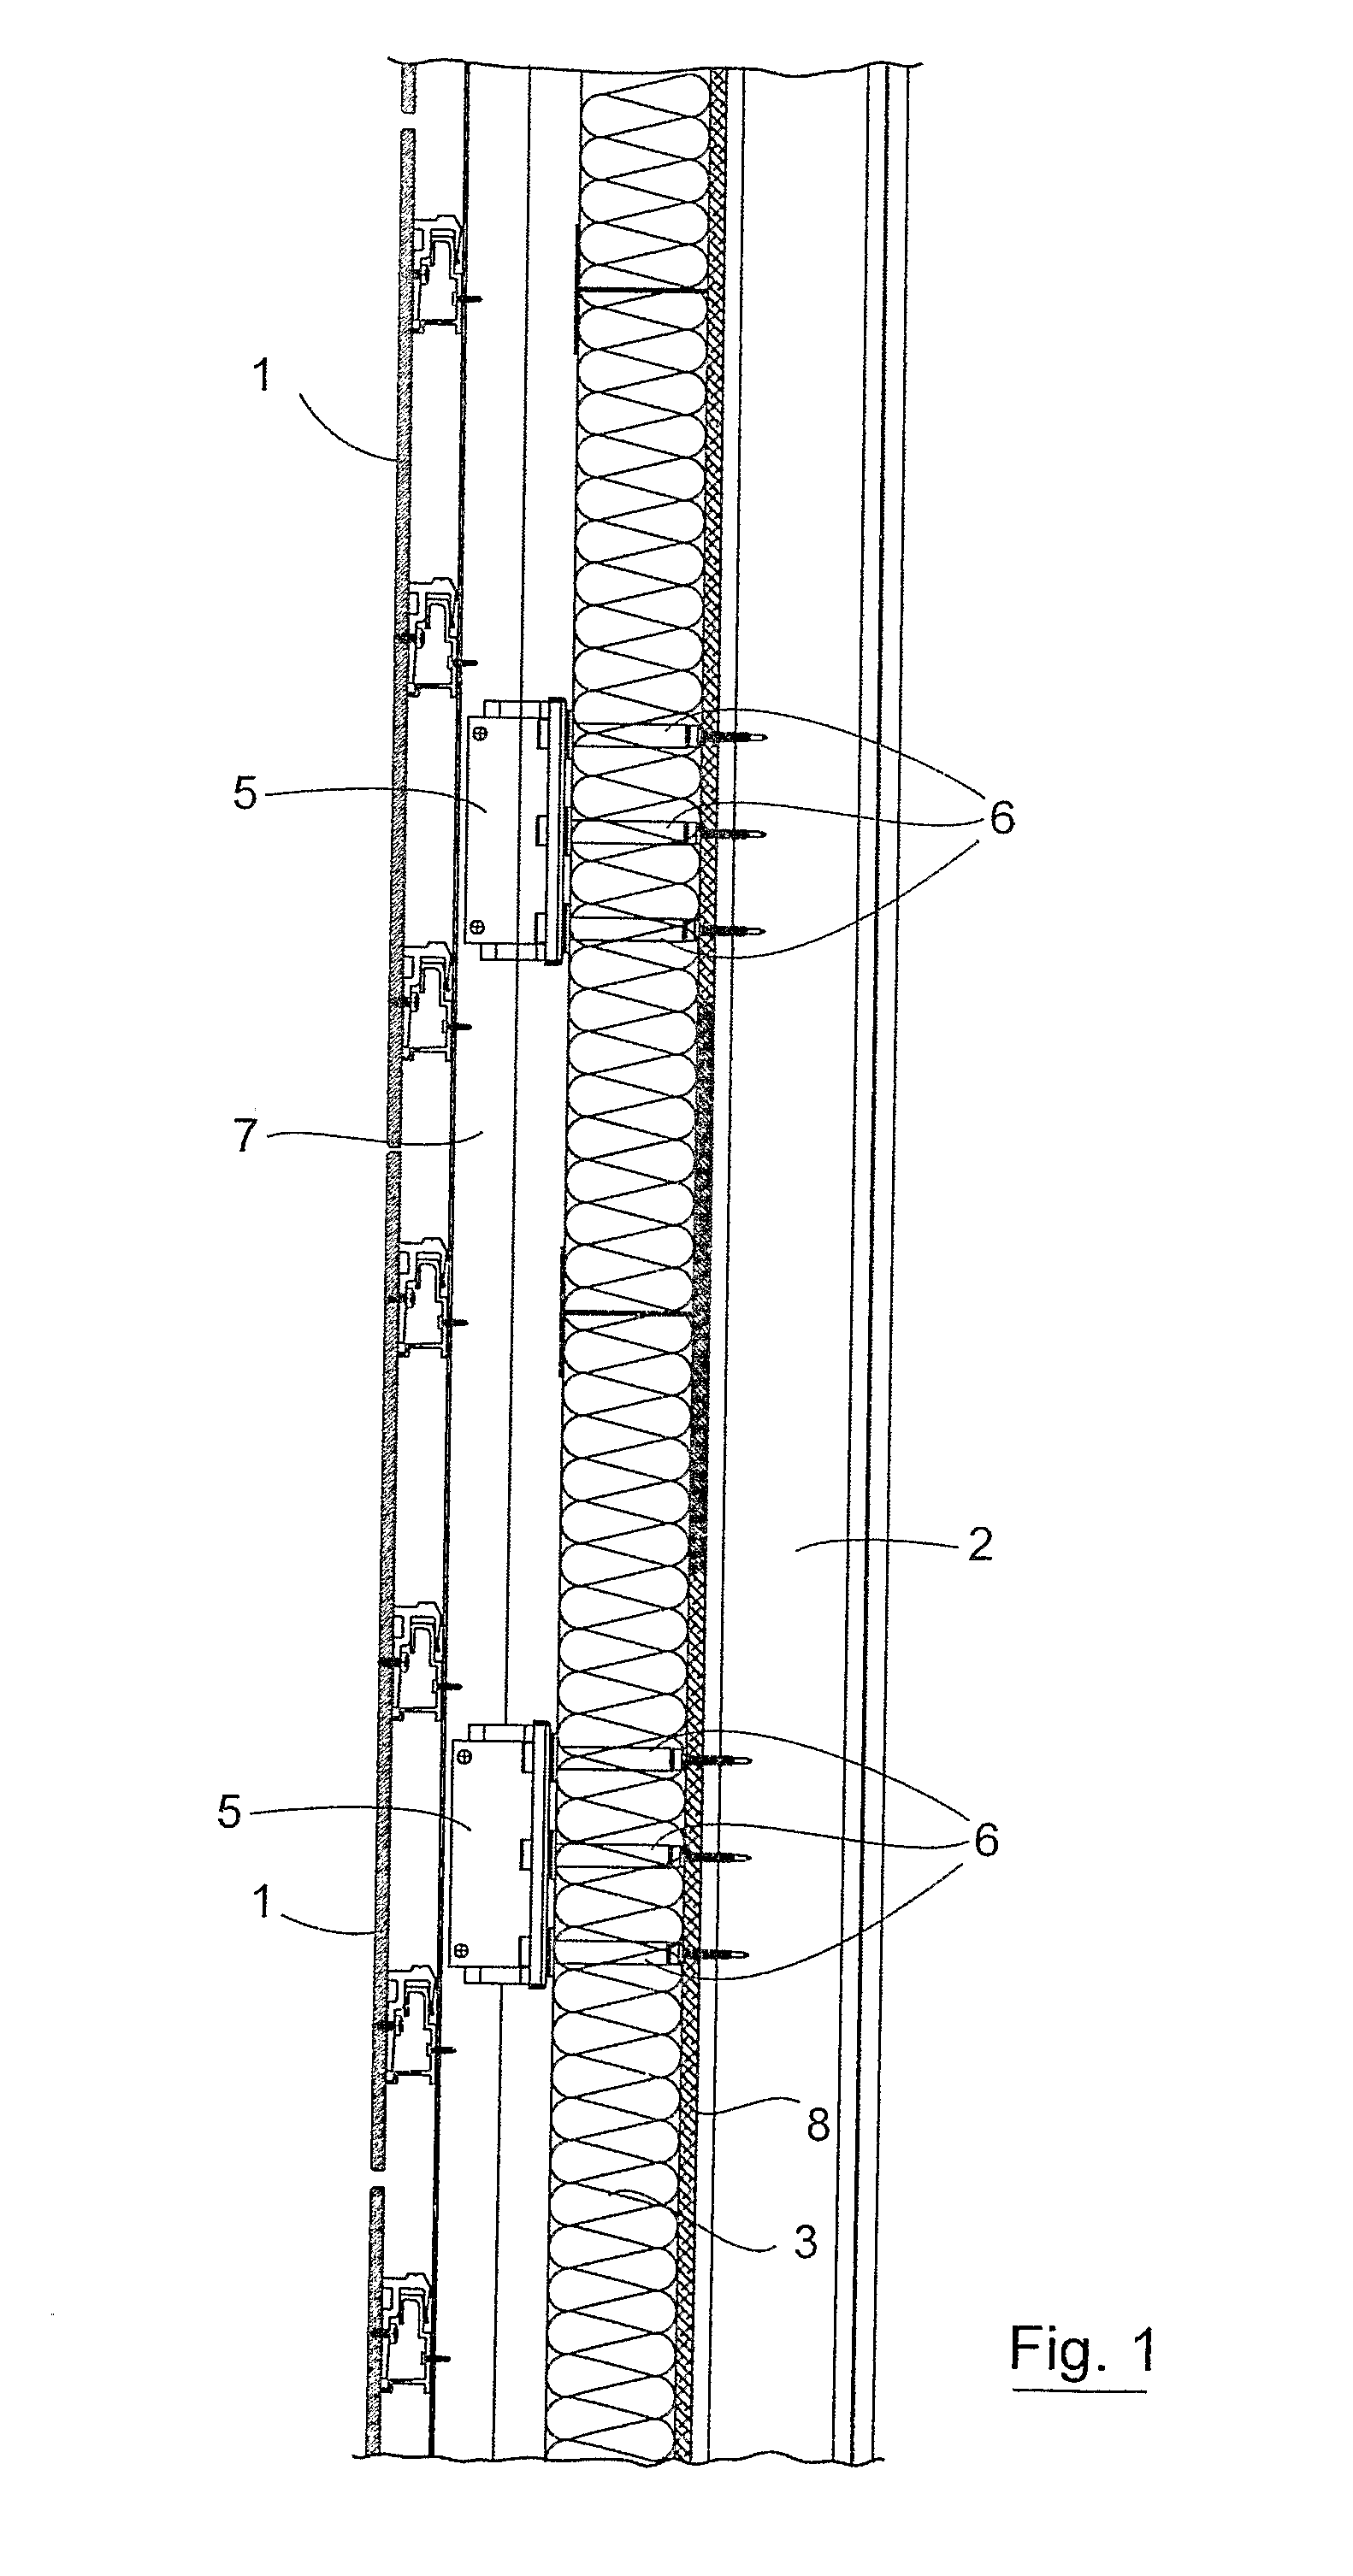 Support system for mounting building facade elements to a framework